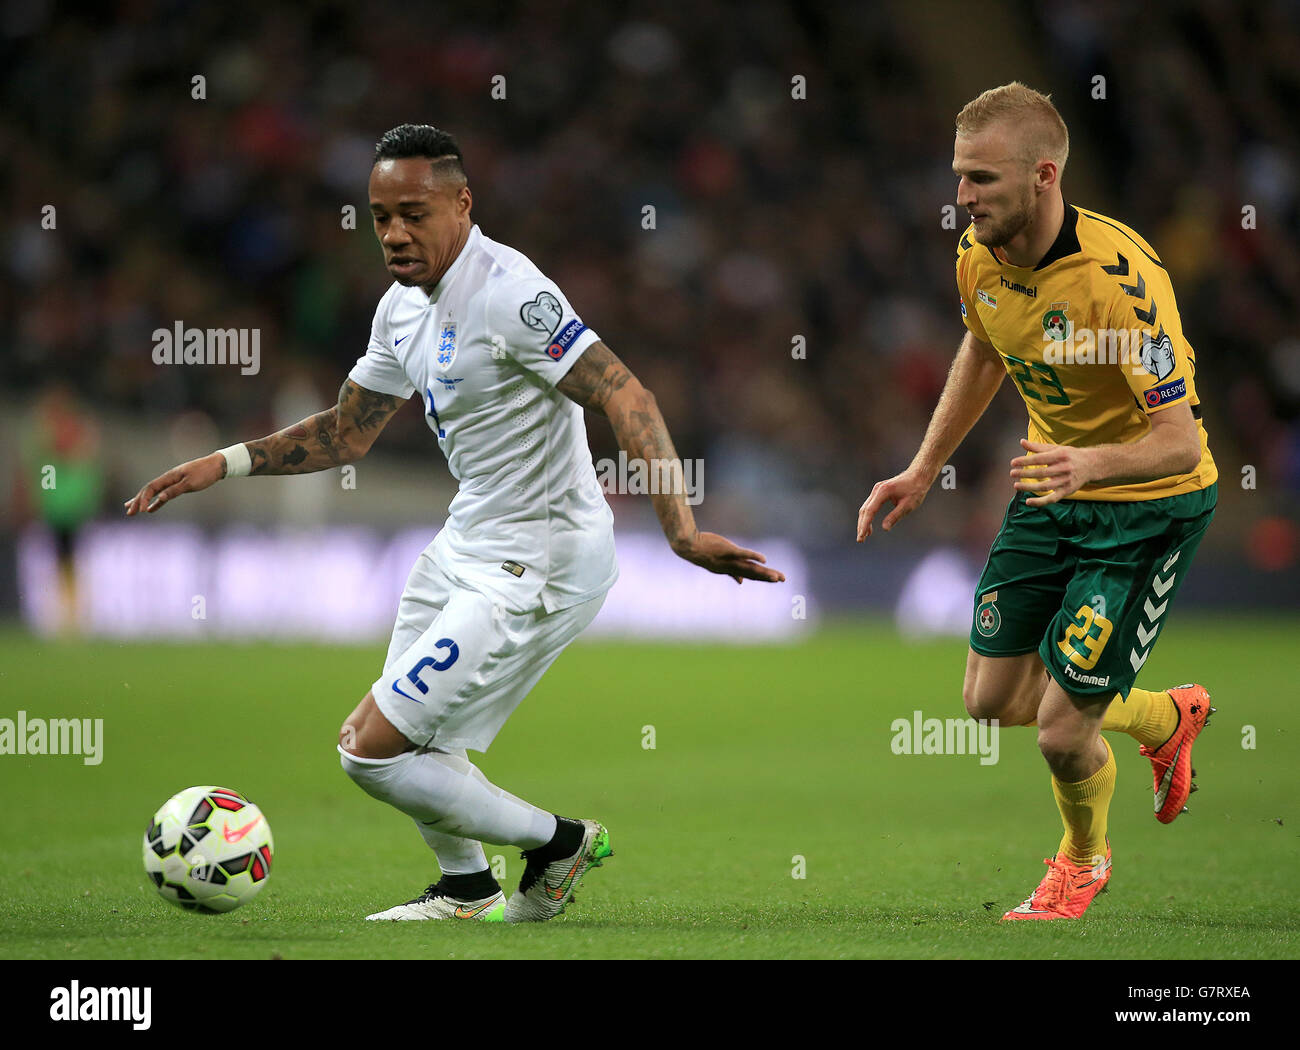 England's Nathaniel Clyne (left) and Lithuania's Vytautas Andriuskevicius battle for the ball during the UEFA 2016 Qualifying, Group E match at Wembley Stadium, London. Stock Photo